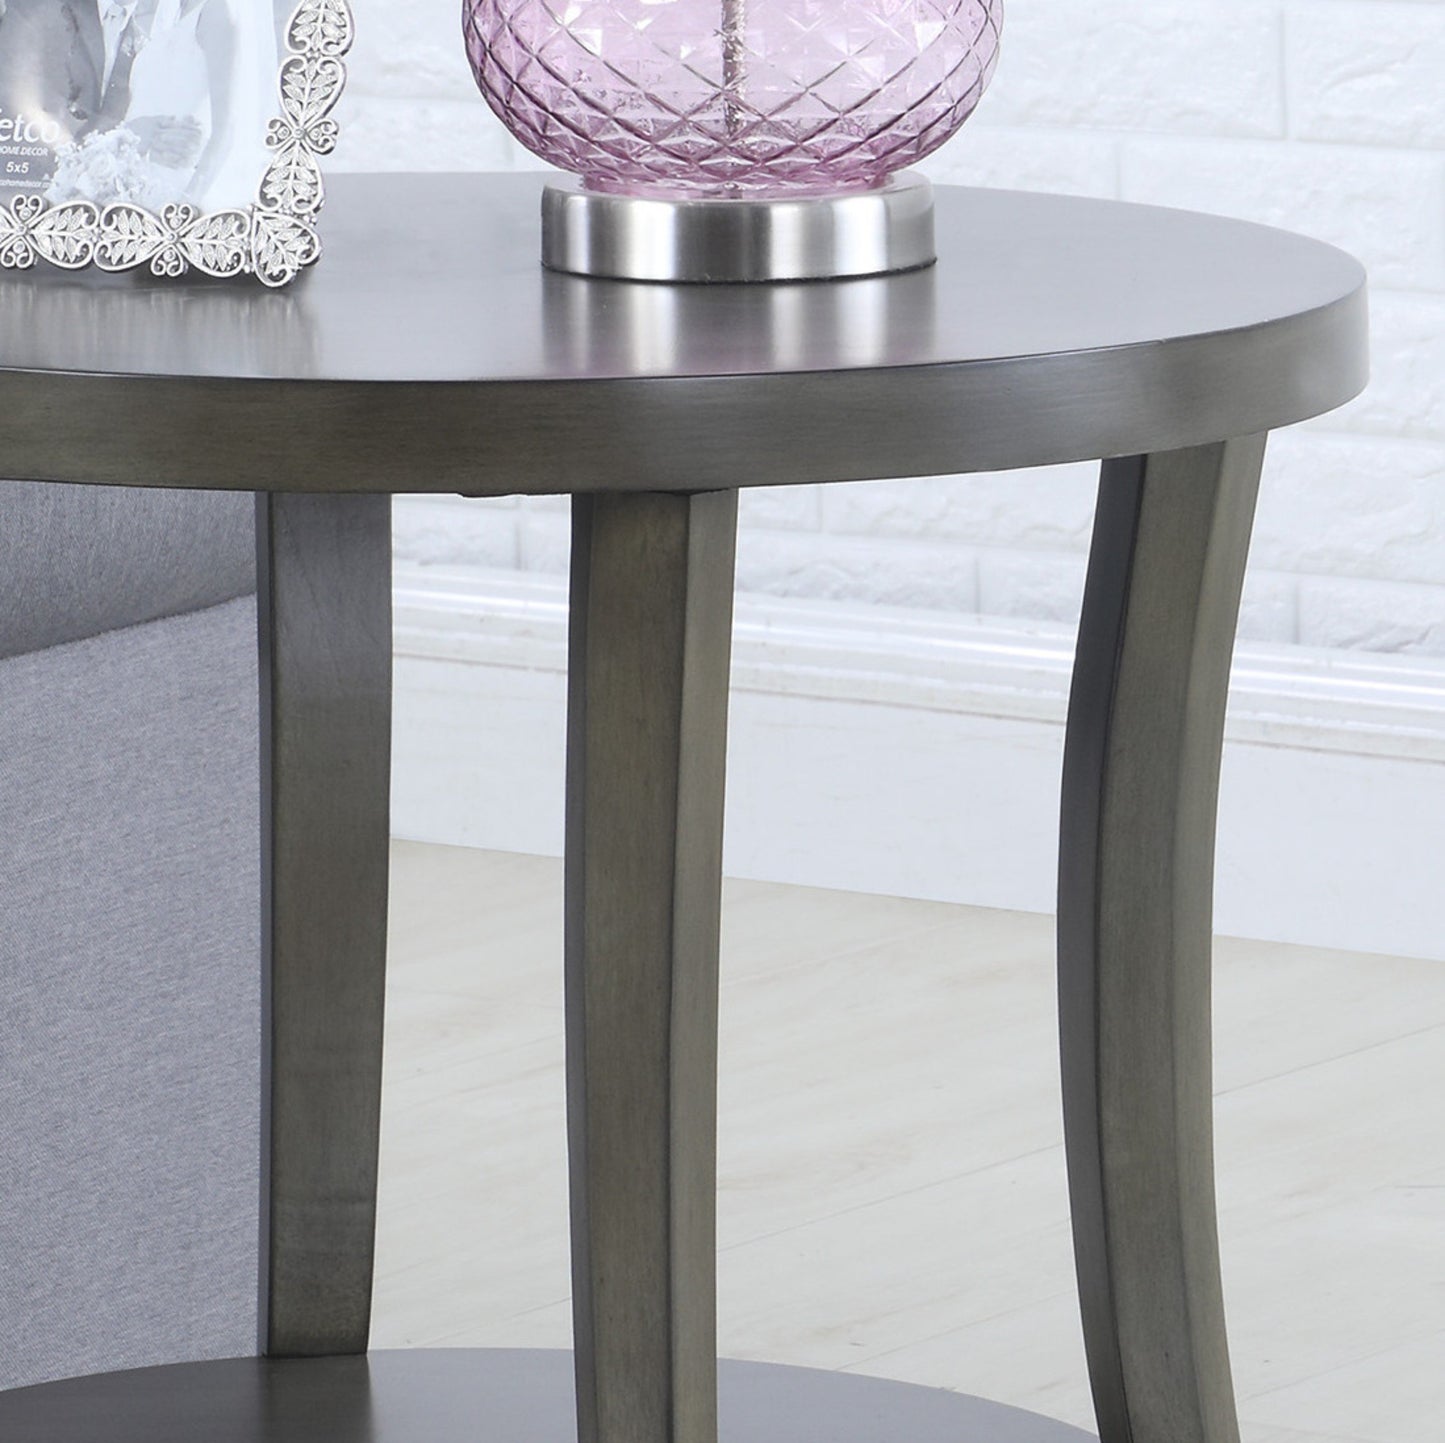 Perth Contemporary Oval Shelf End Table, Gray